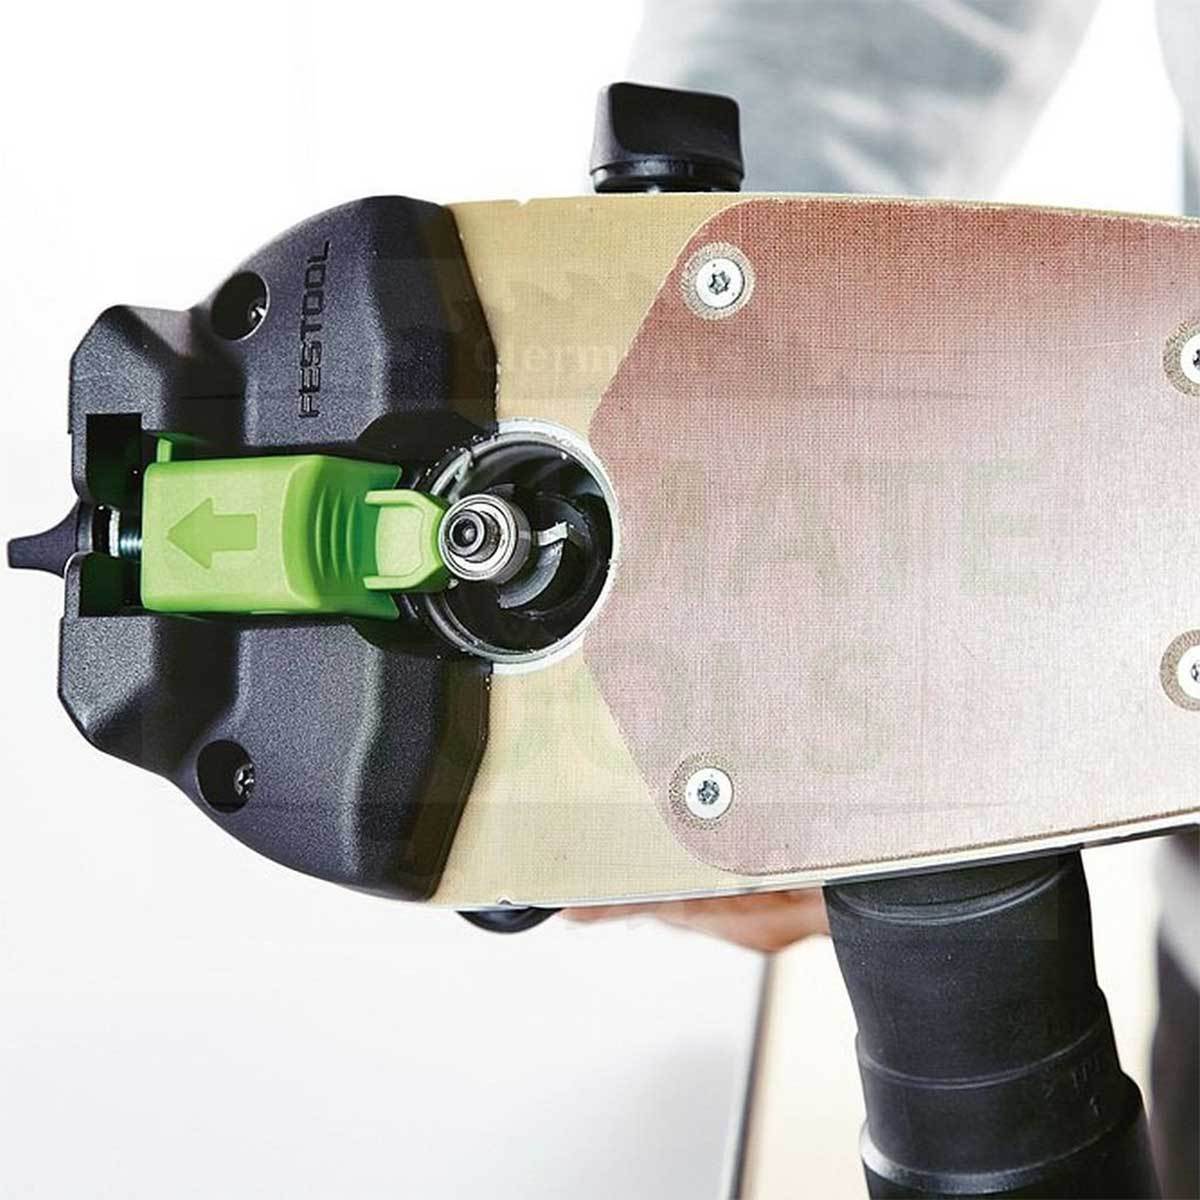 The bottom of the router baseplate has a raised plate and adjustable bearing brake to keep bearing from turning freely.